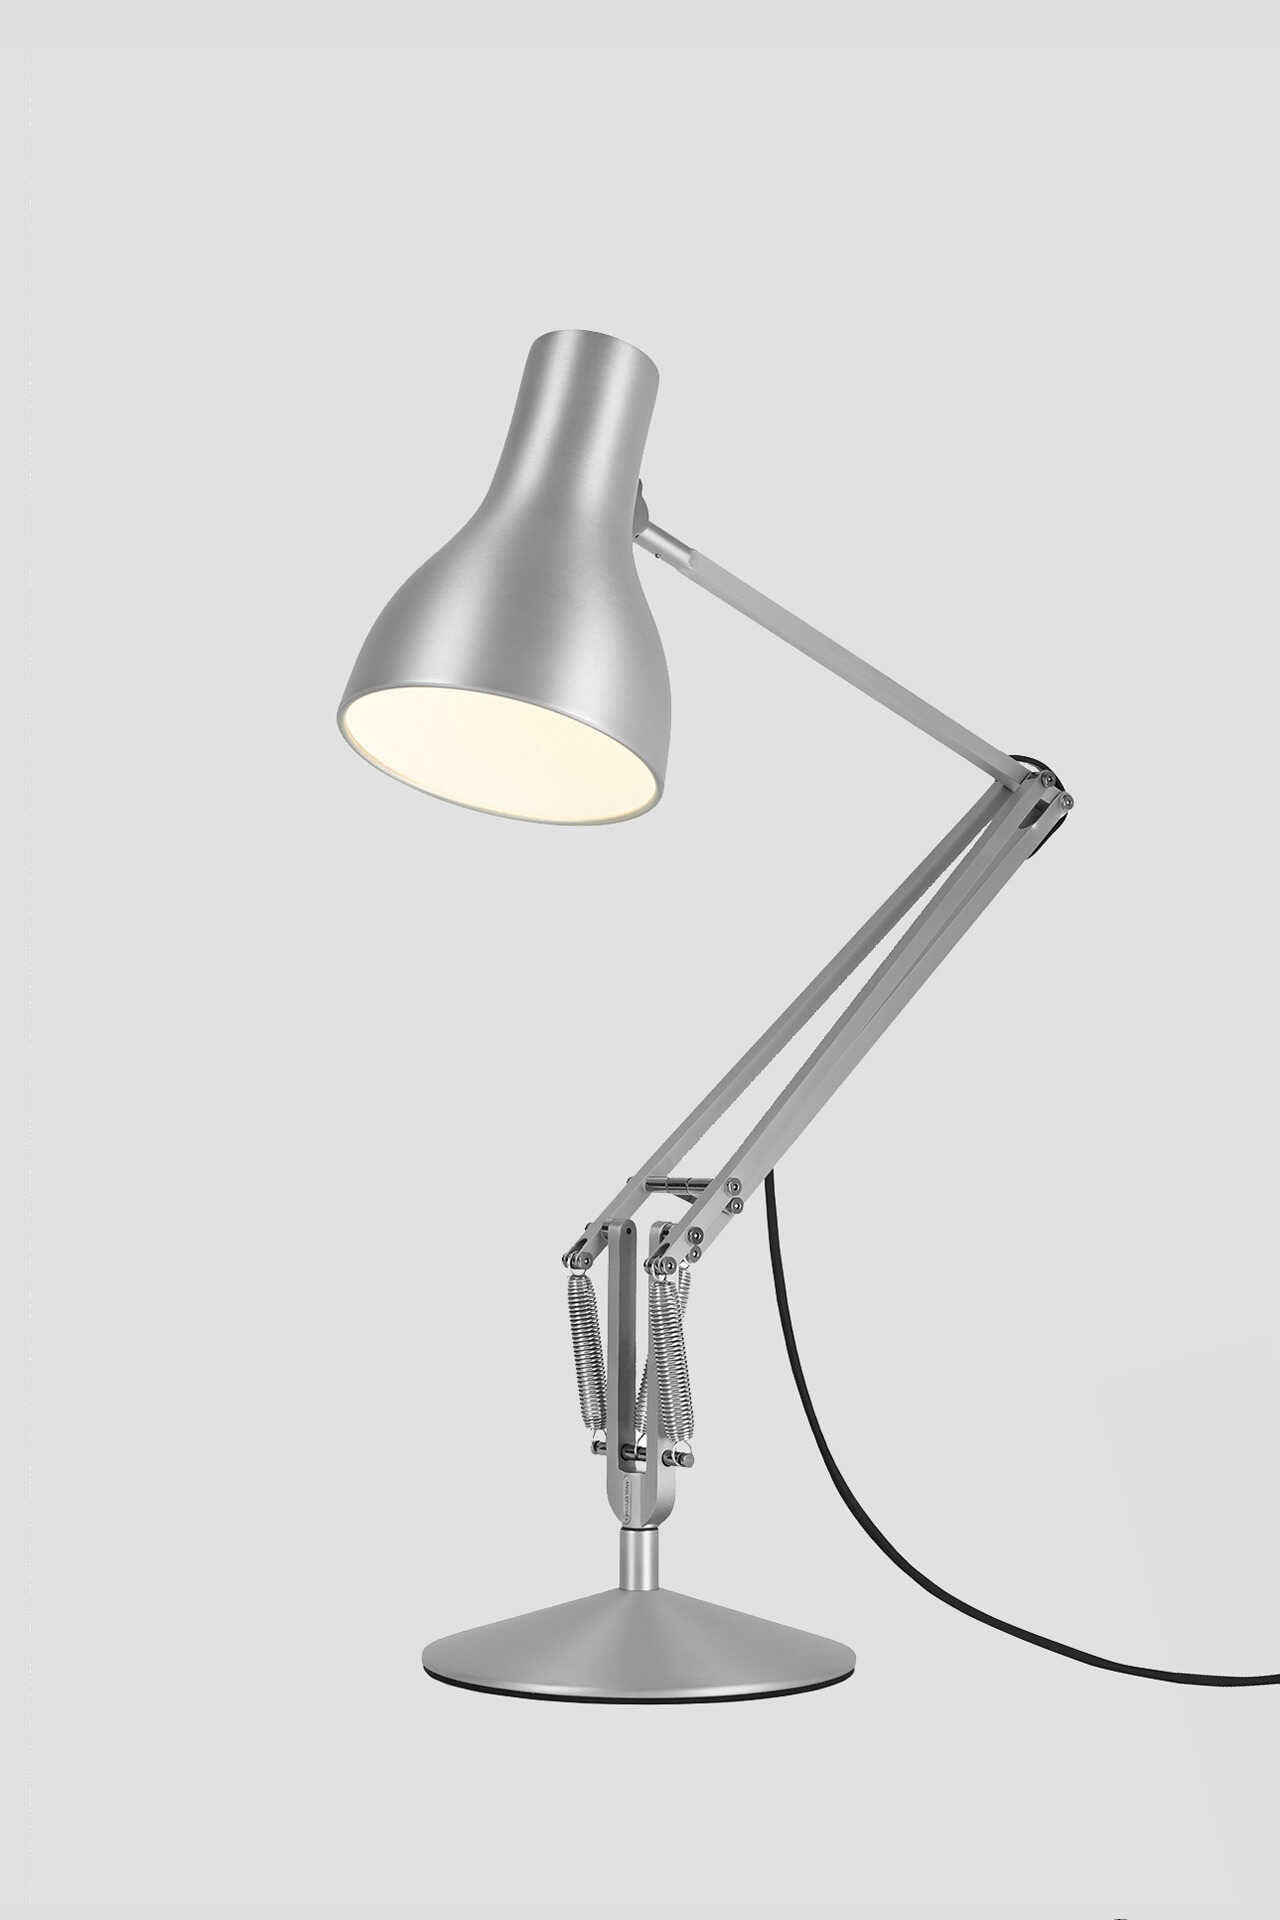 ANGLEPOISE TYPE752